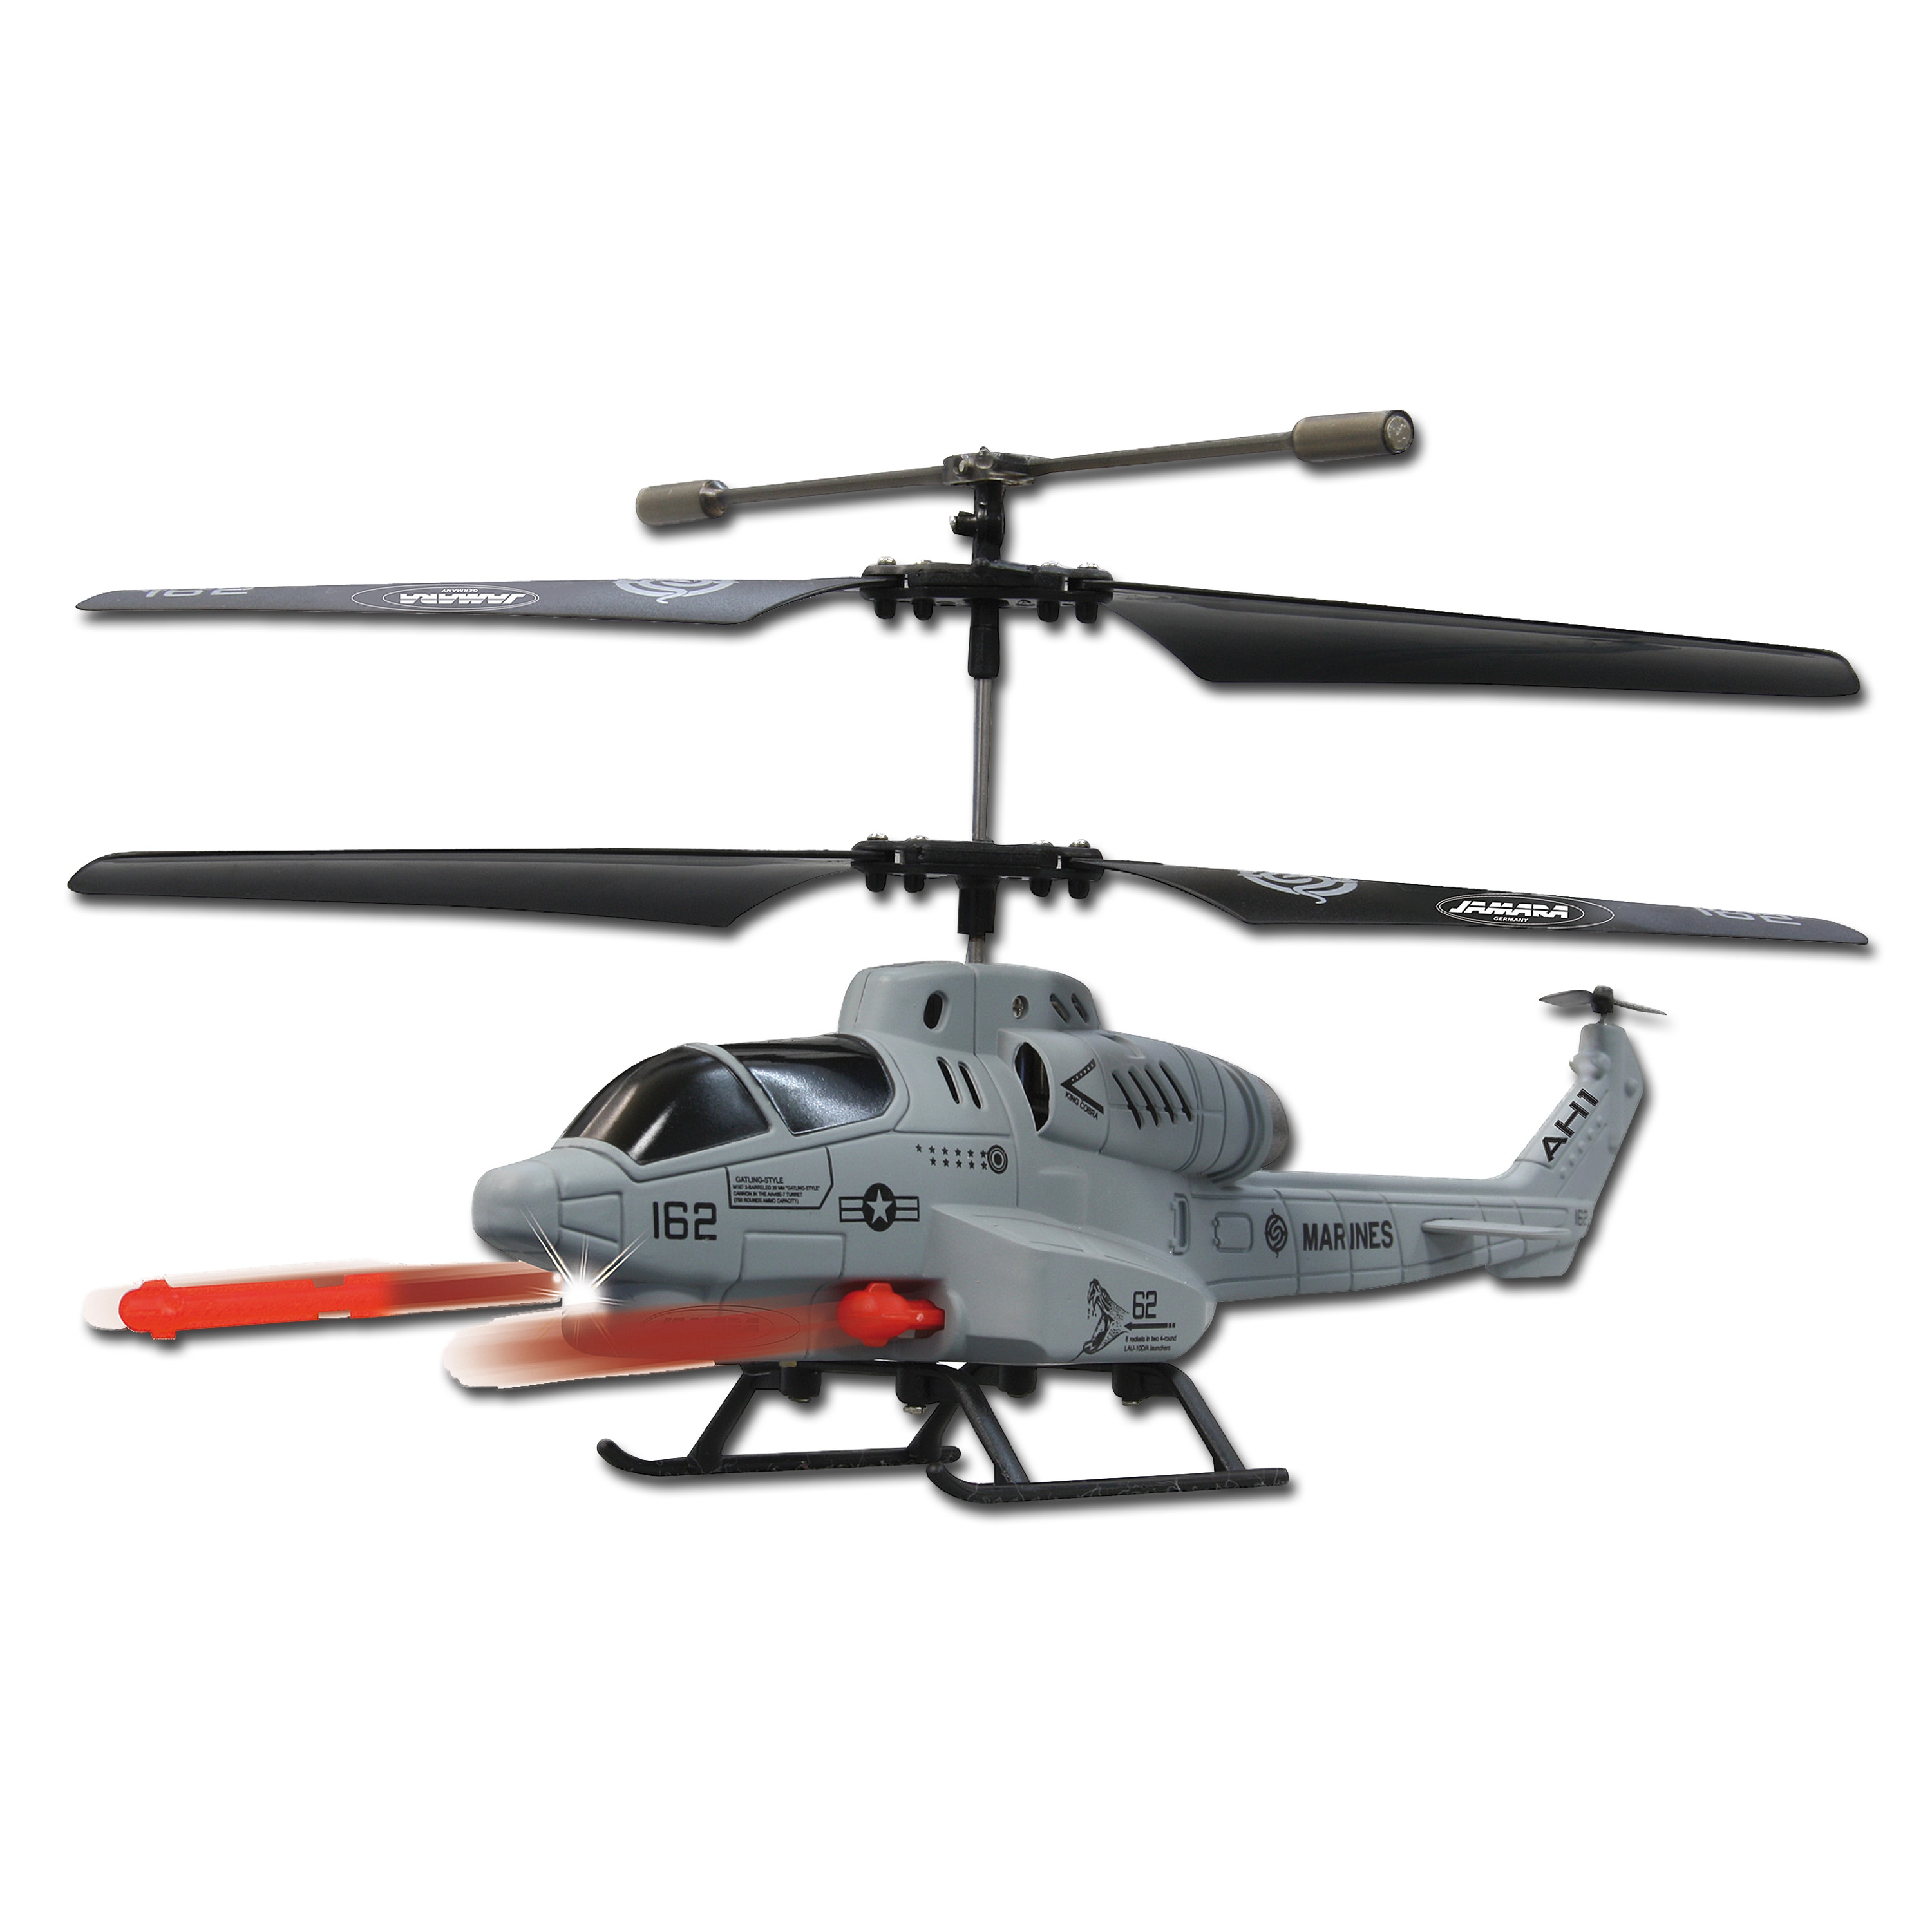 model king helicopter remote